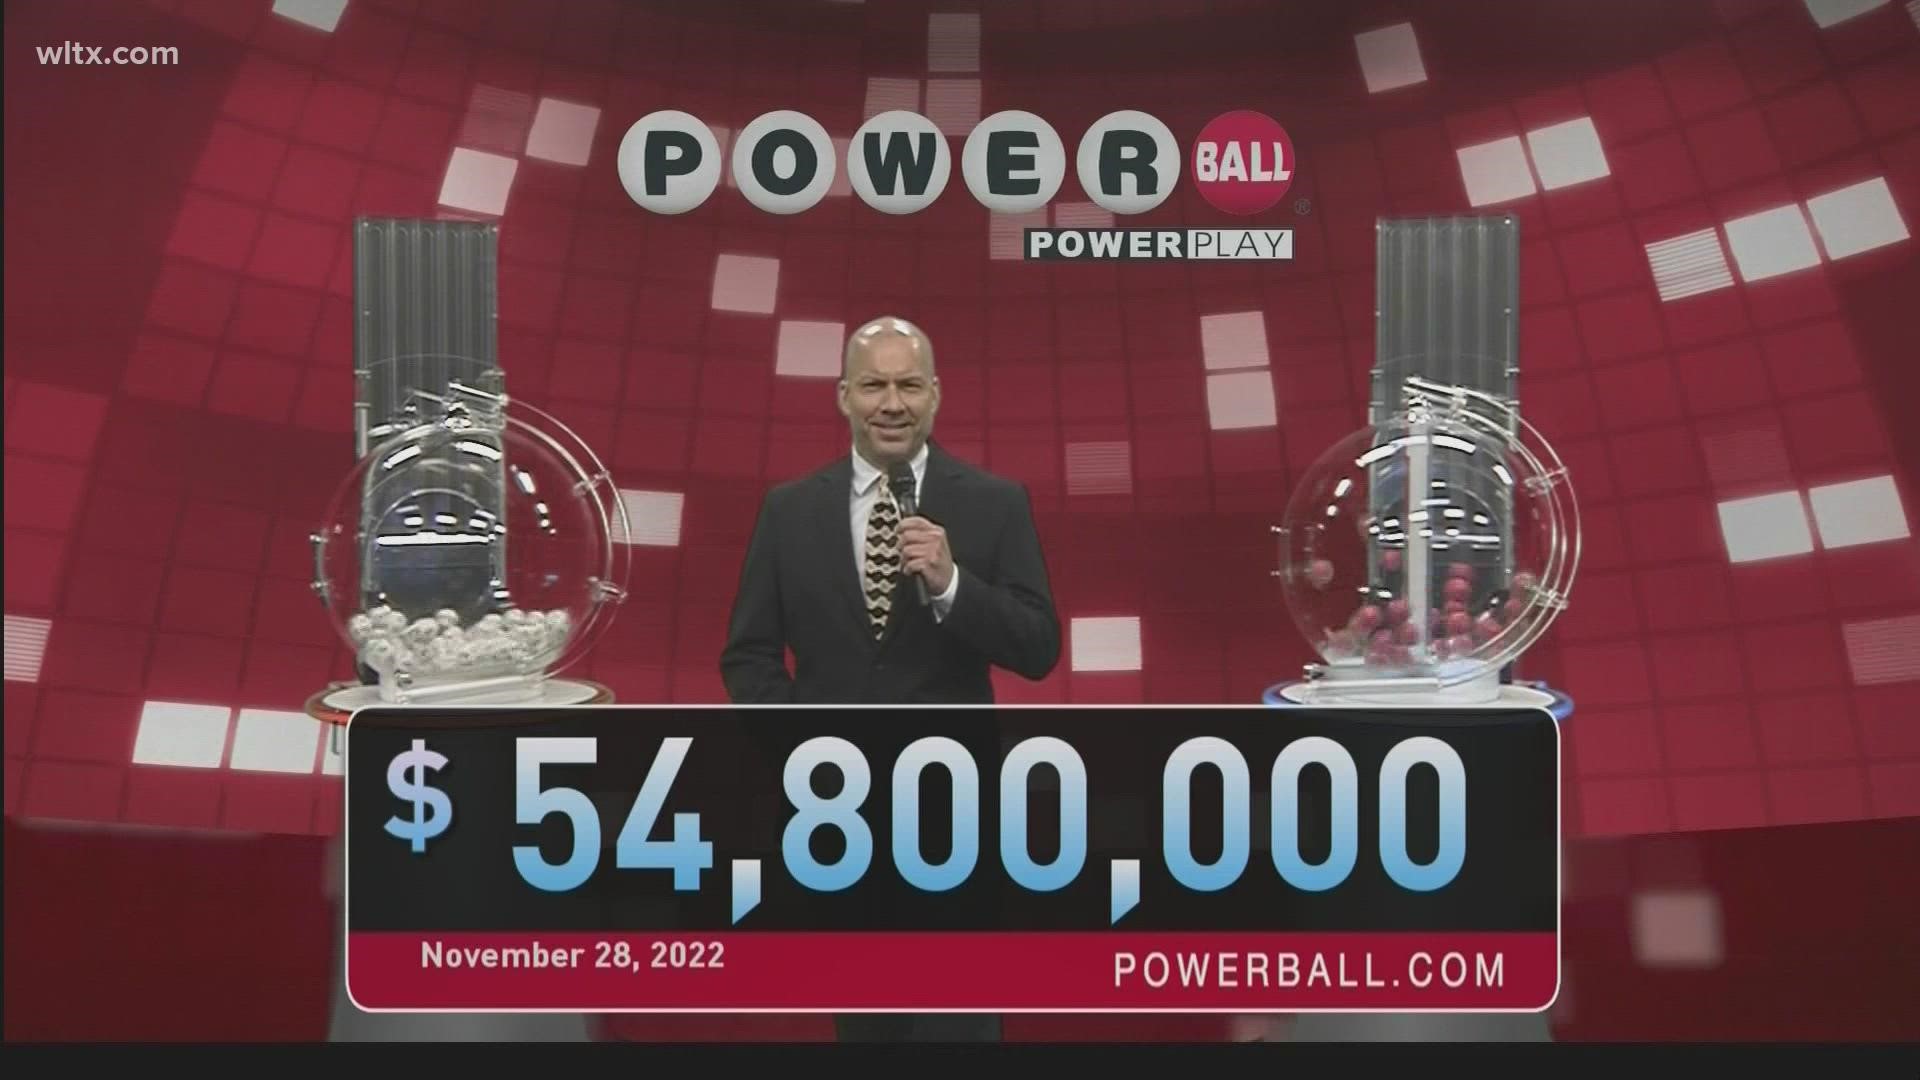 Here are the winning Powerball numbers for Monday, November 28, 2022.